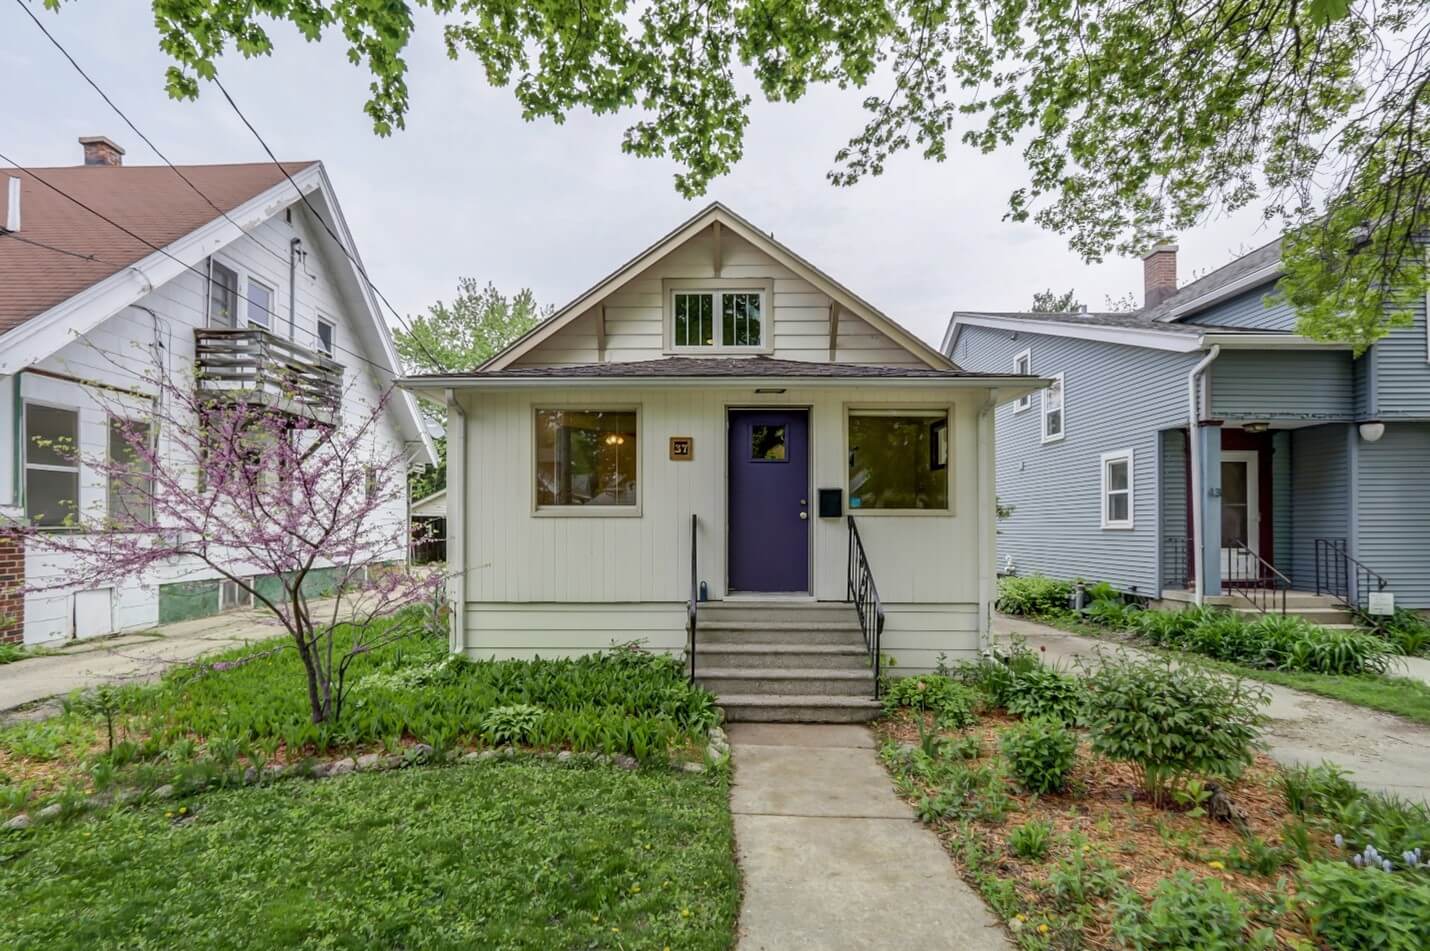 white single story house with purple door